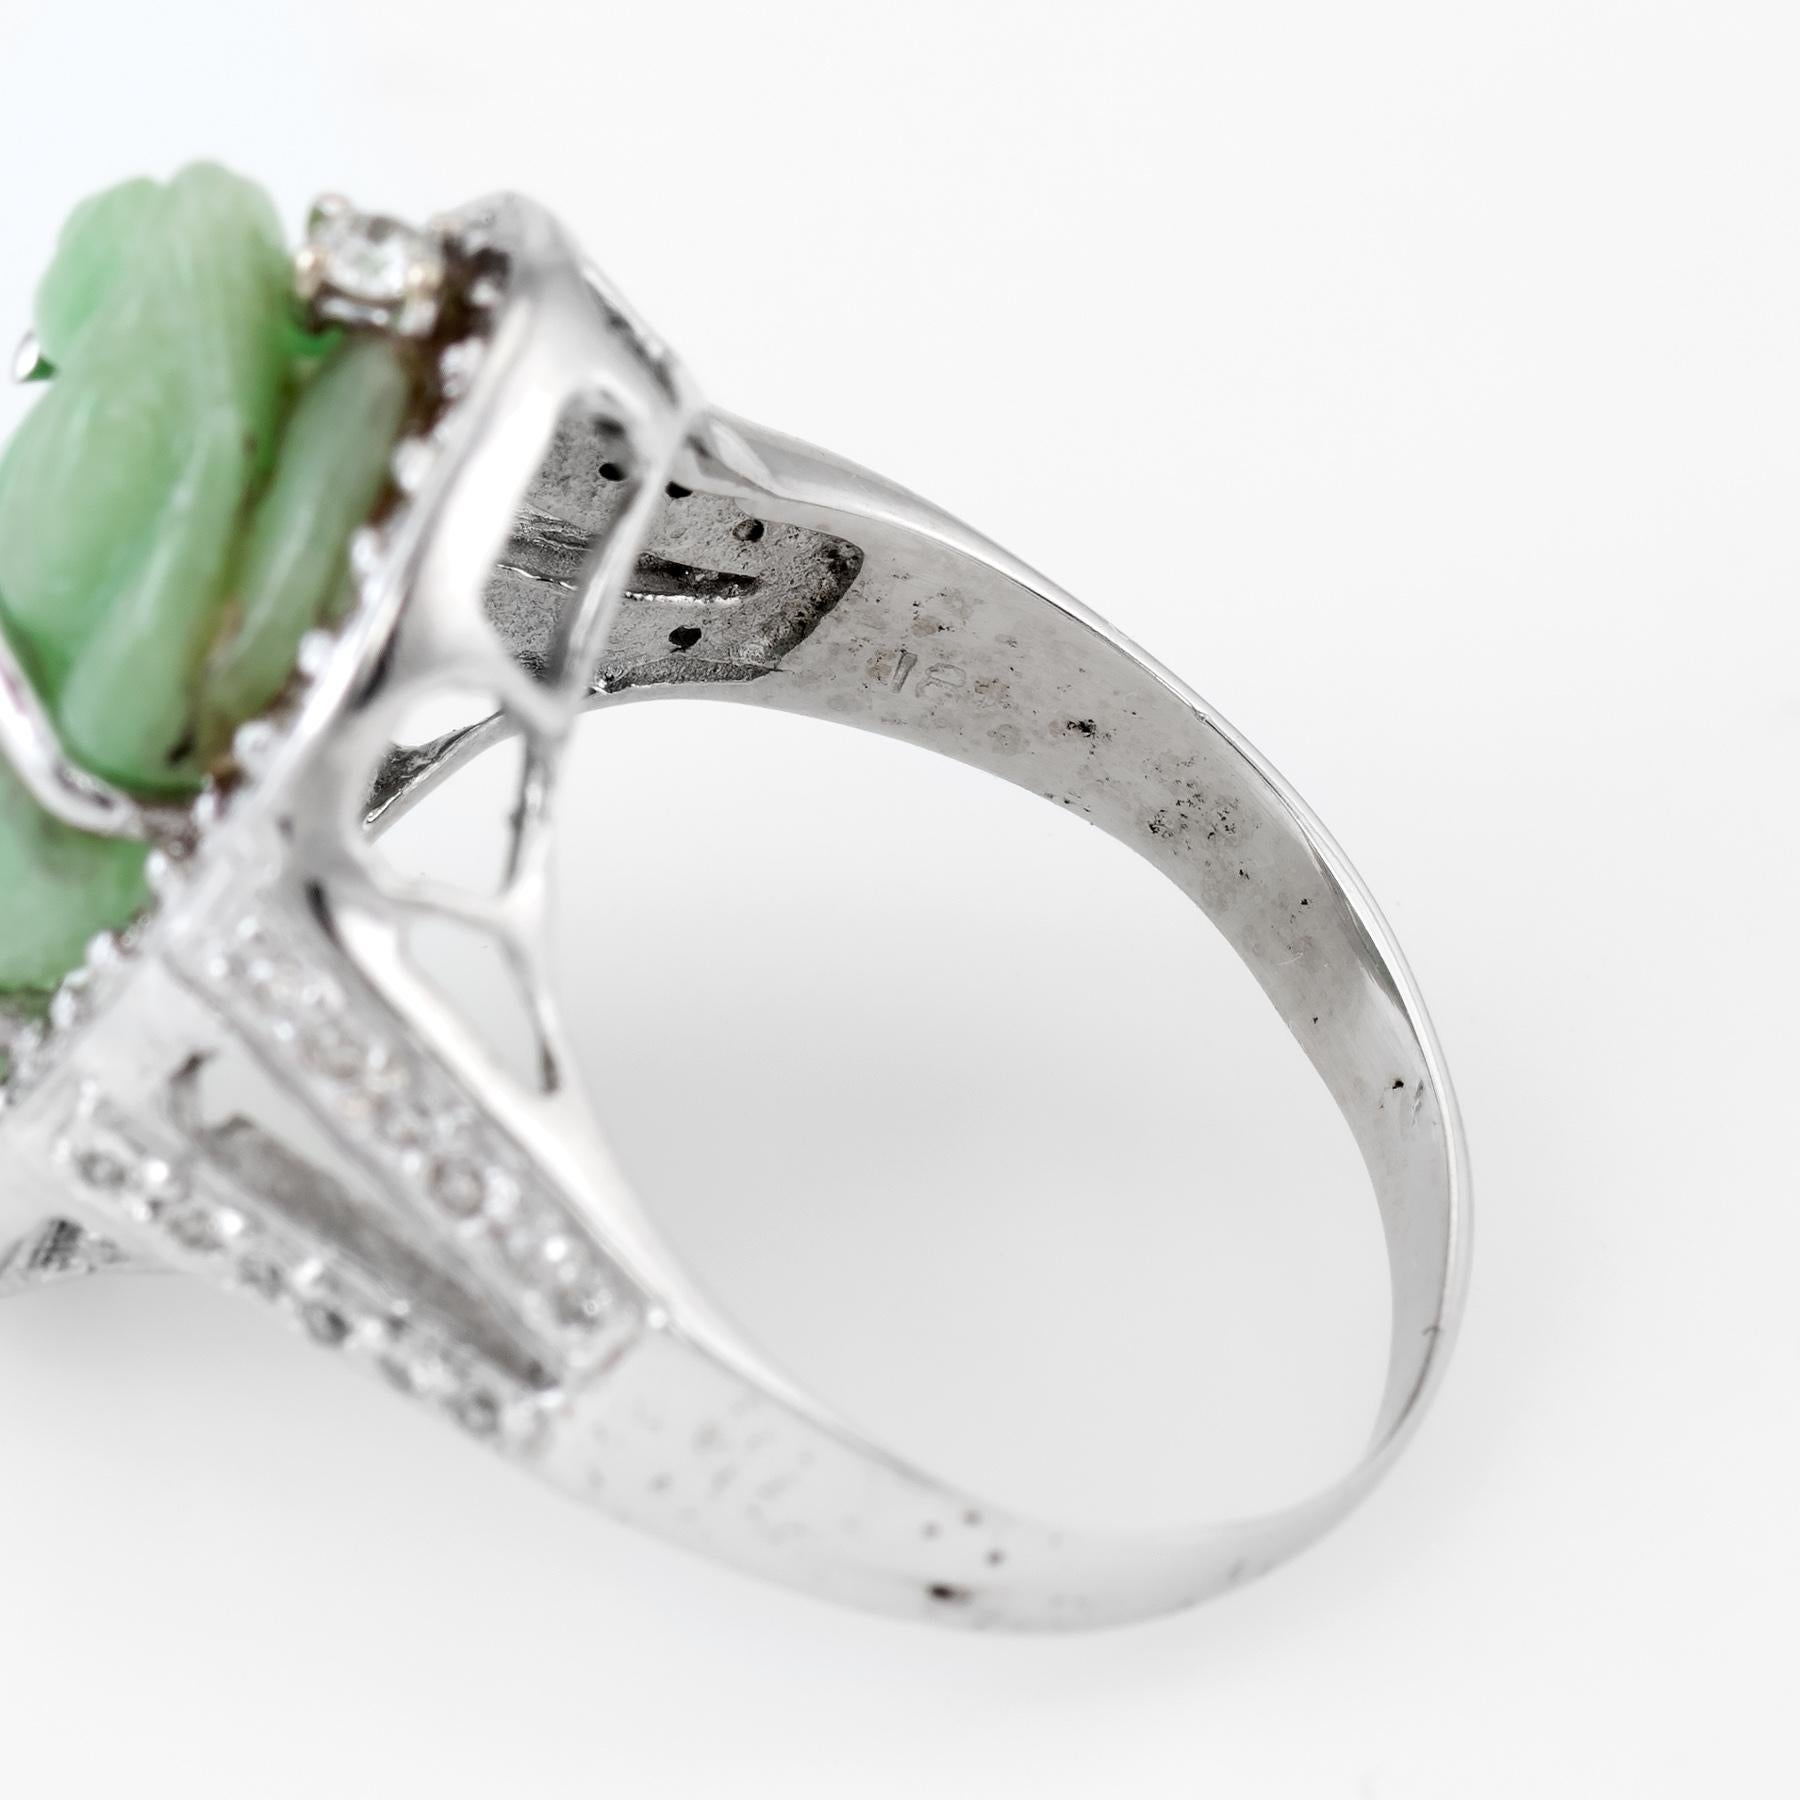 Carved Jade Frog Cocktail Ring Diamond Vintage 18 Karat White Gold Jewelry In Excellent Condition For Sale In Torrance, CA